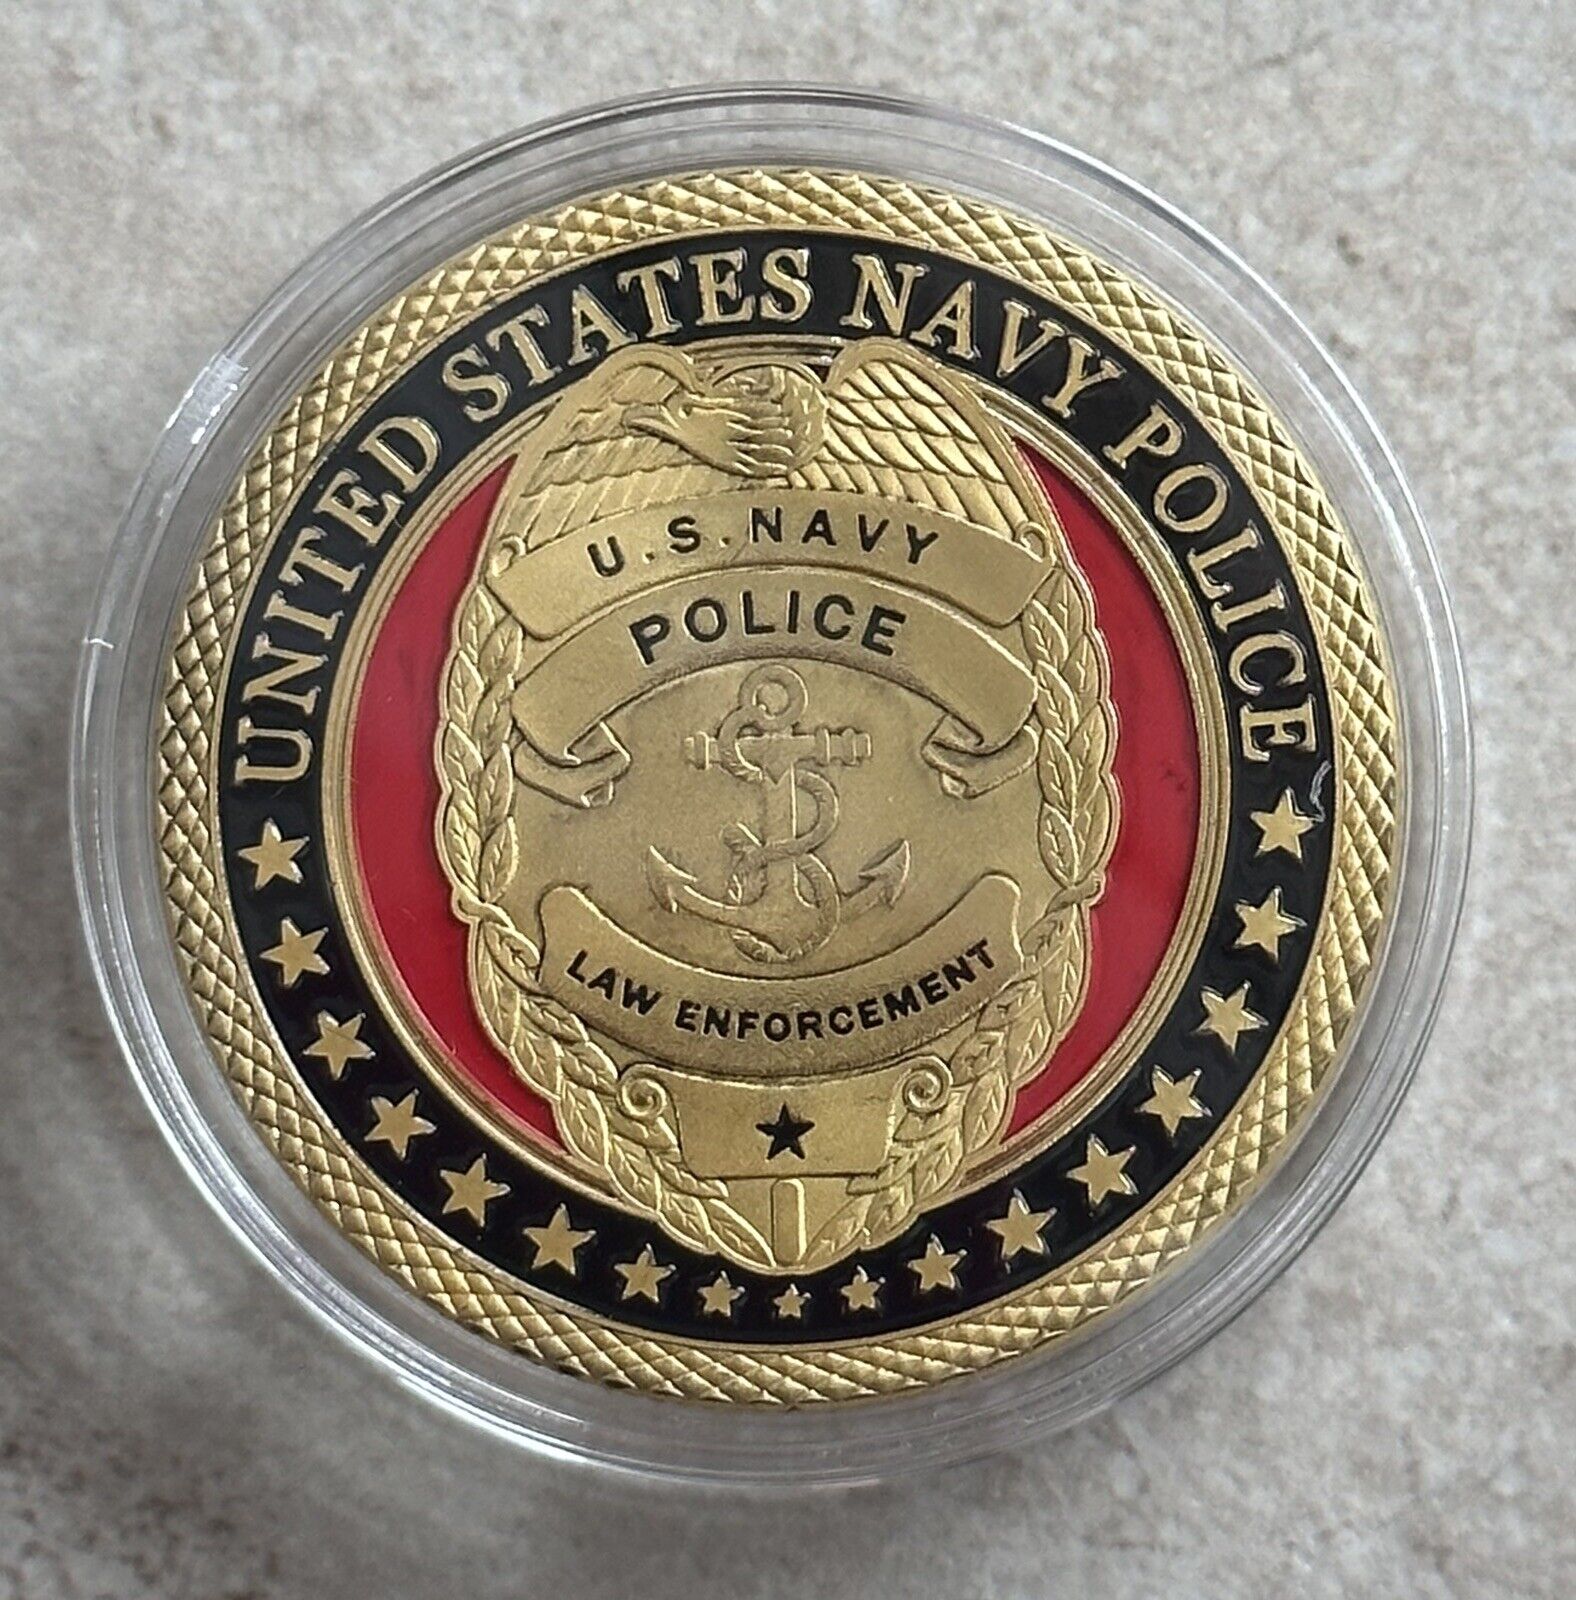 Navy Police MP Law Enforcement Challenge Coin USN US Navy